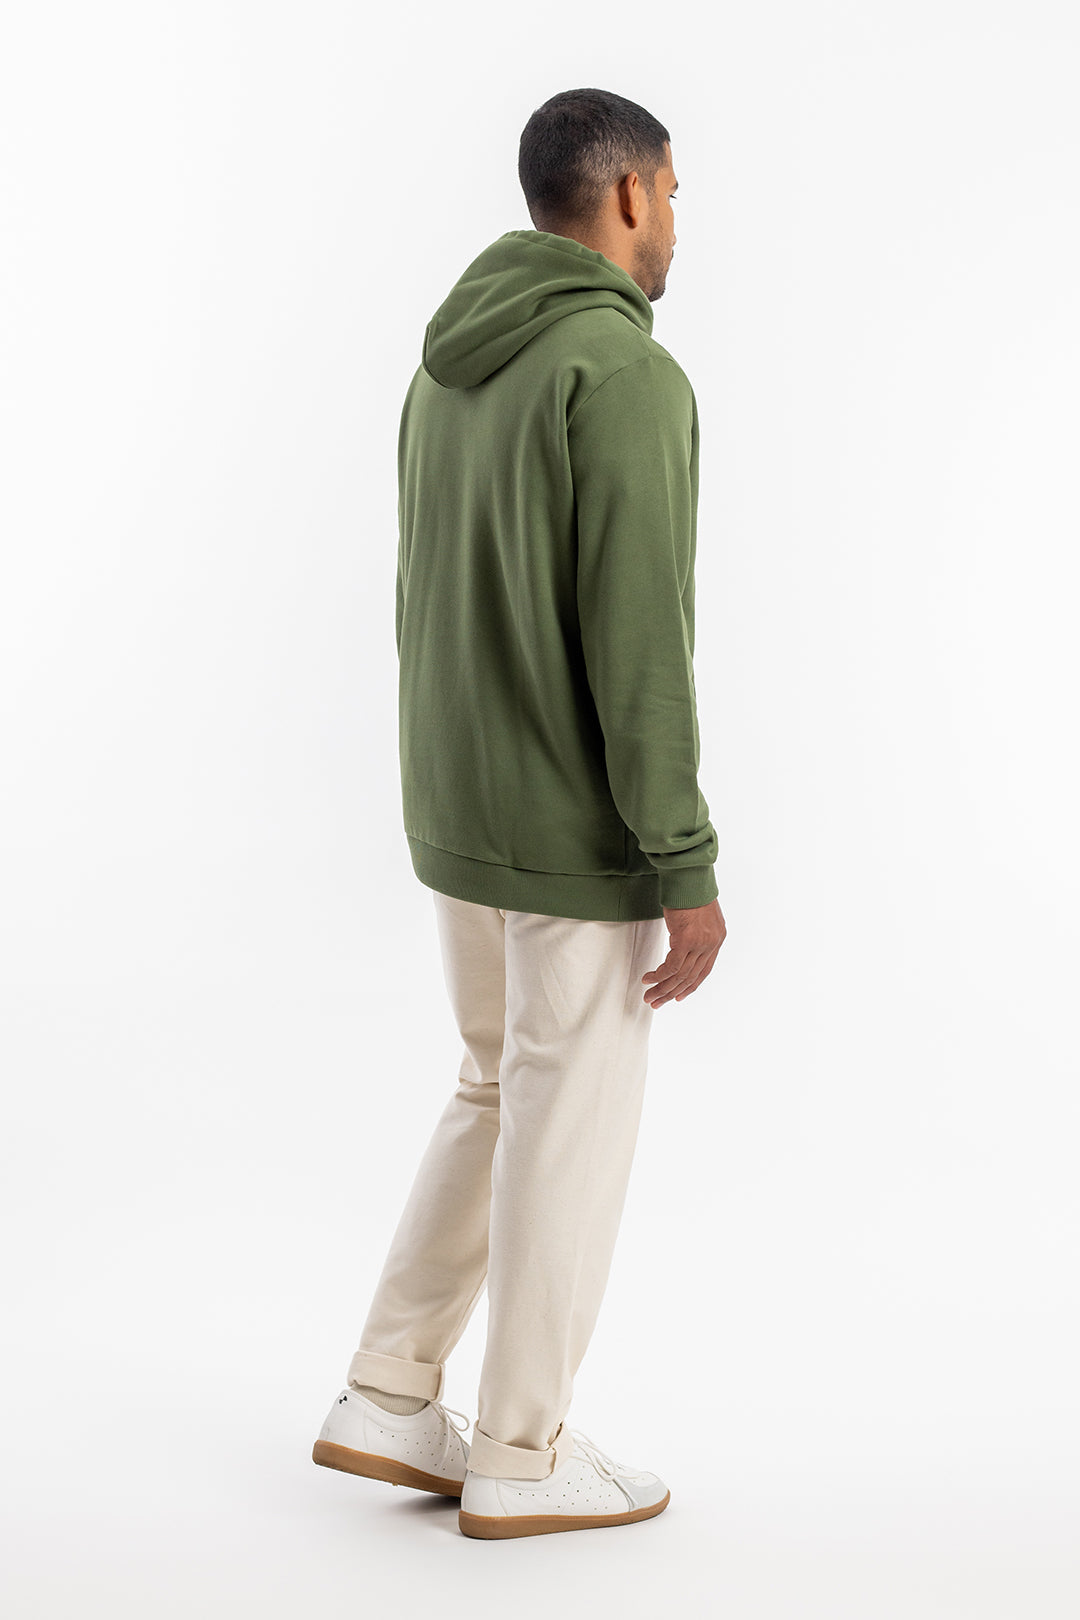 Dark green hoodie made of organic cotton from Rotholz